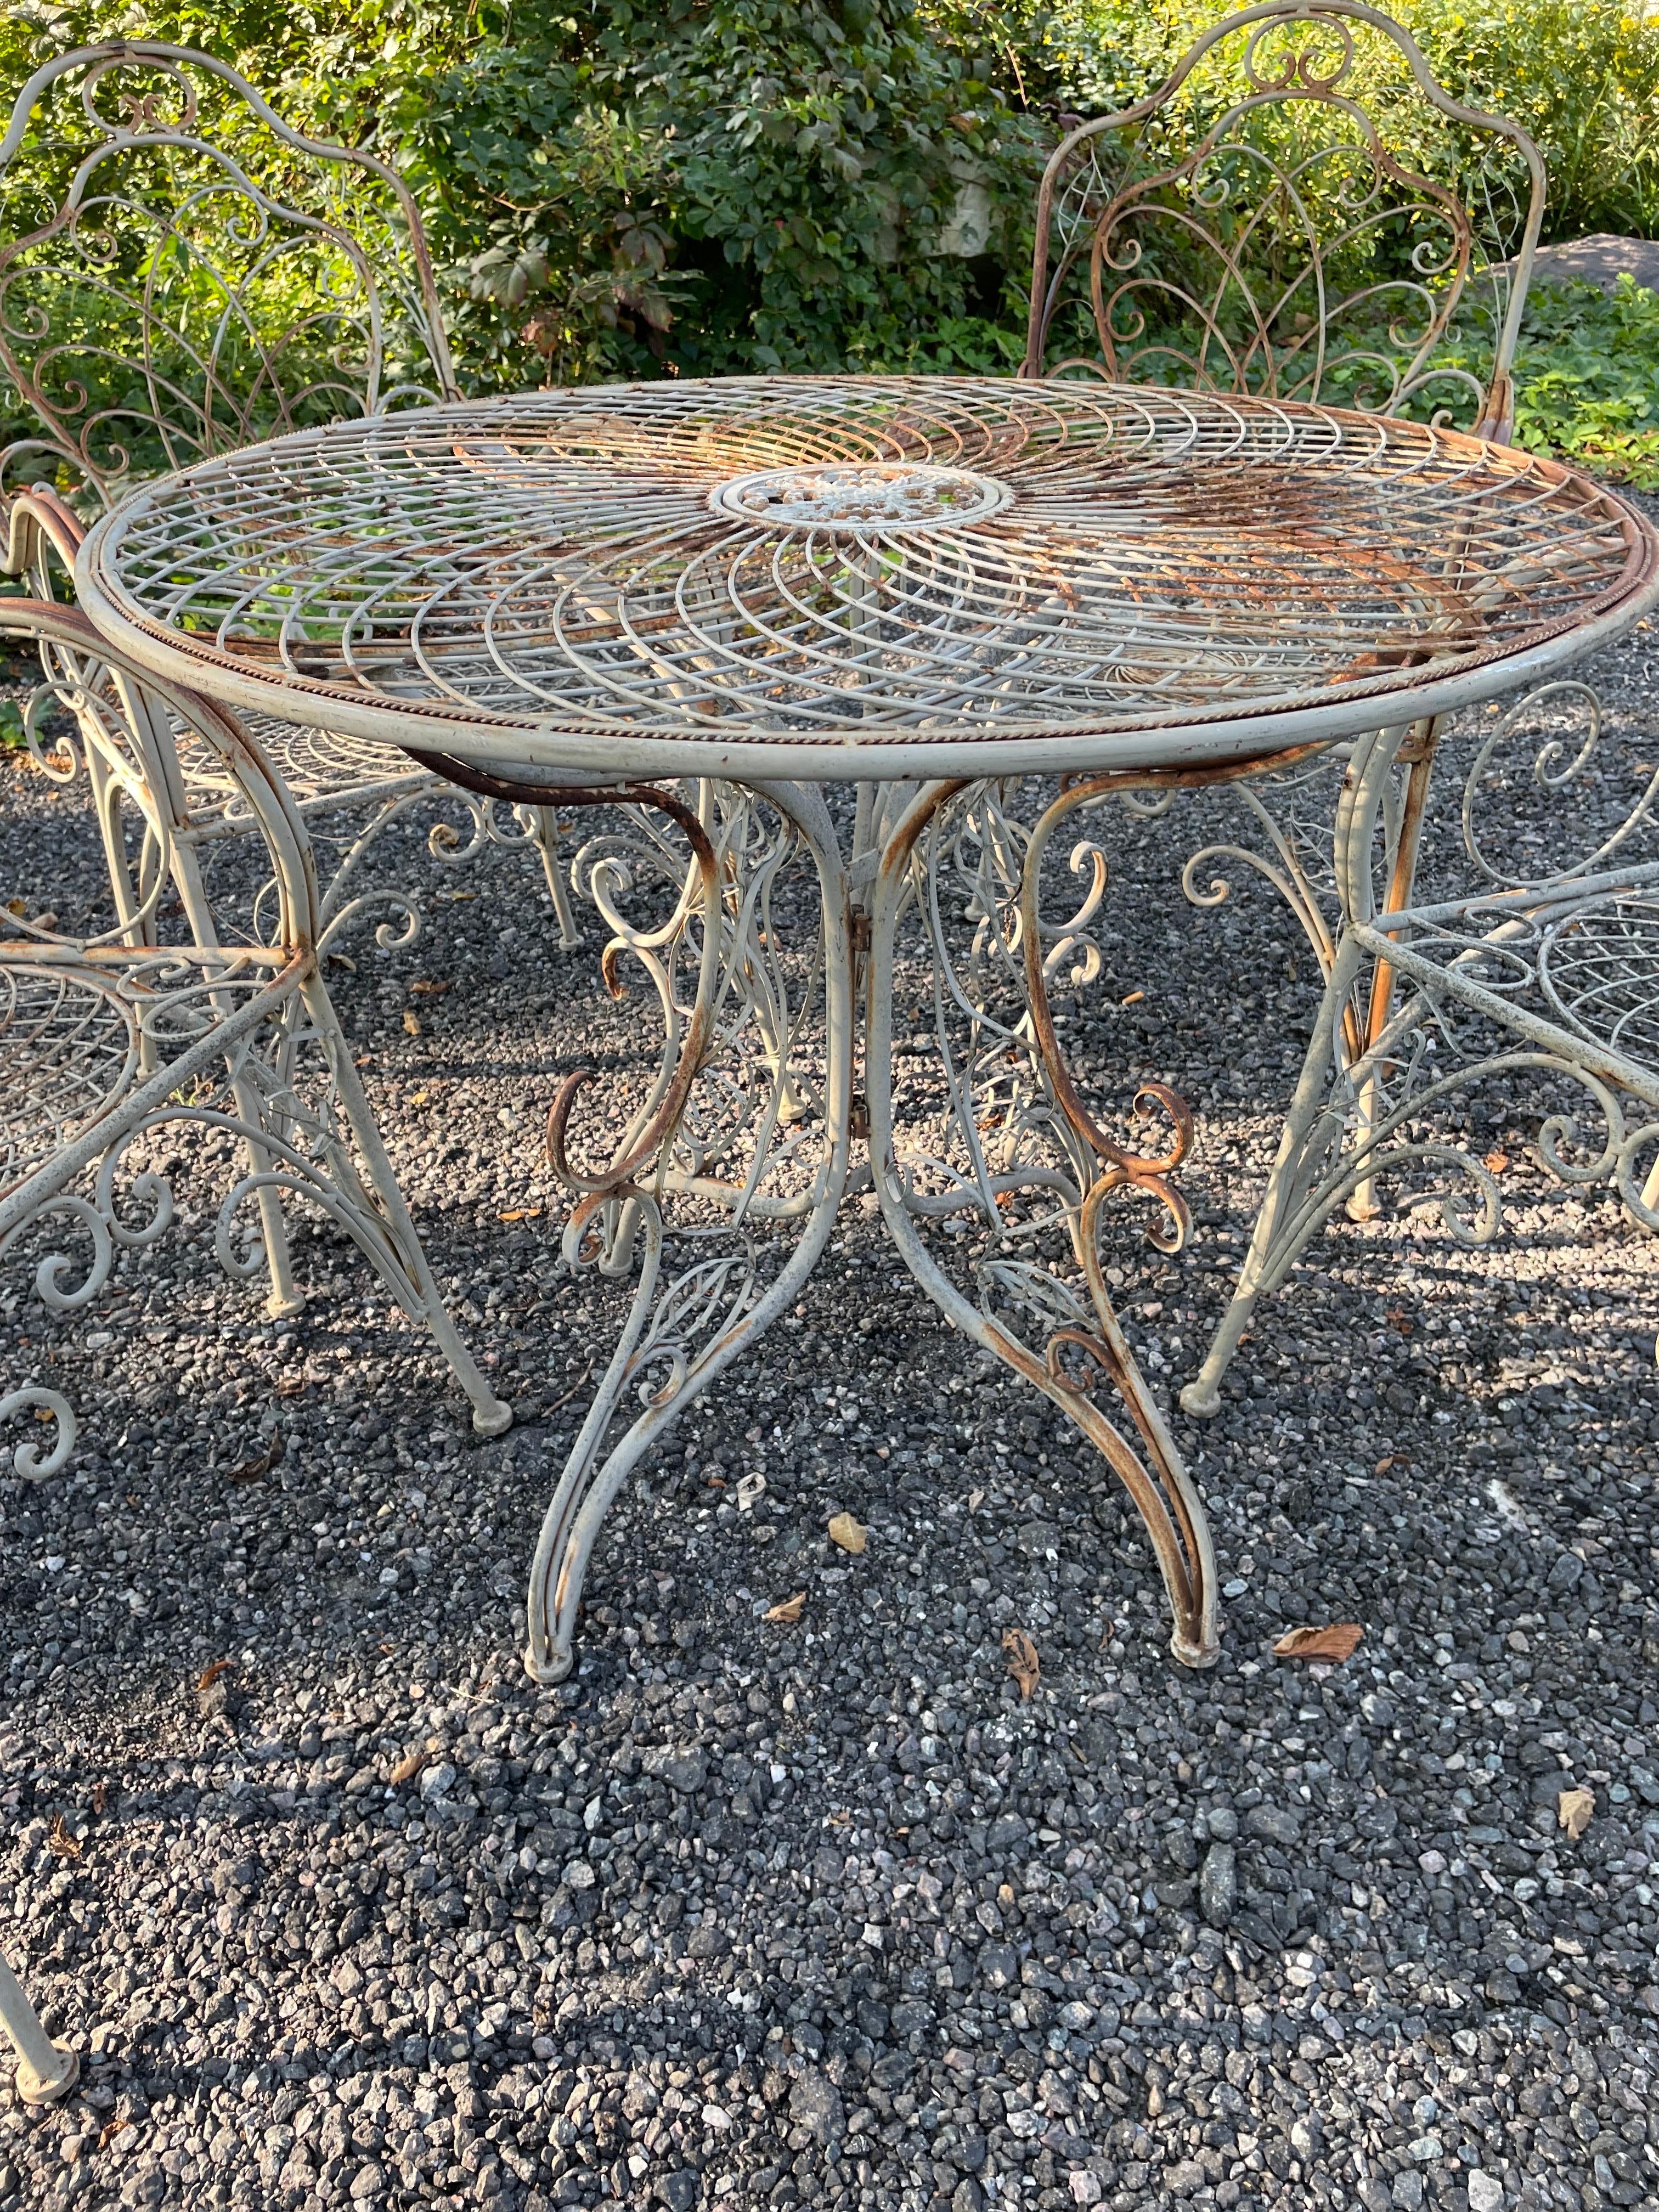 20th Century Vintage Wrought Iron Outdoor Patio Furniture For Sale